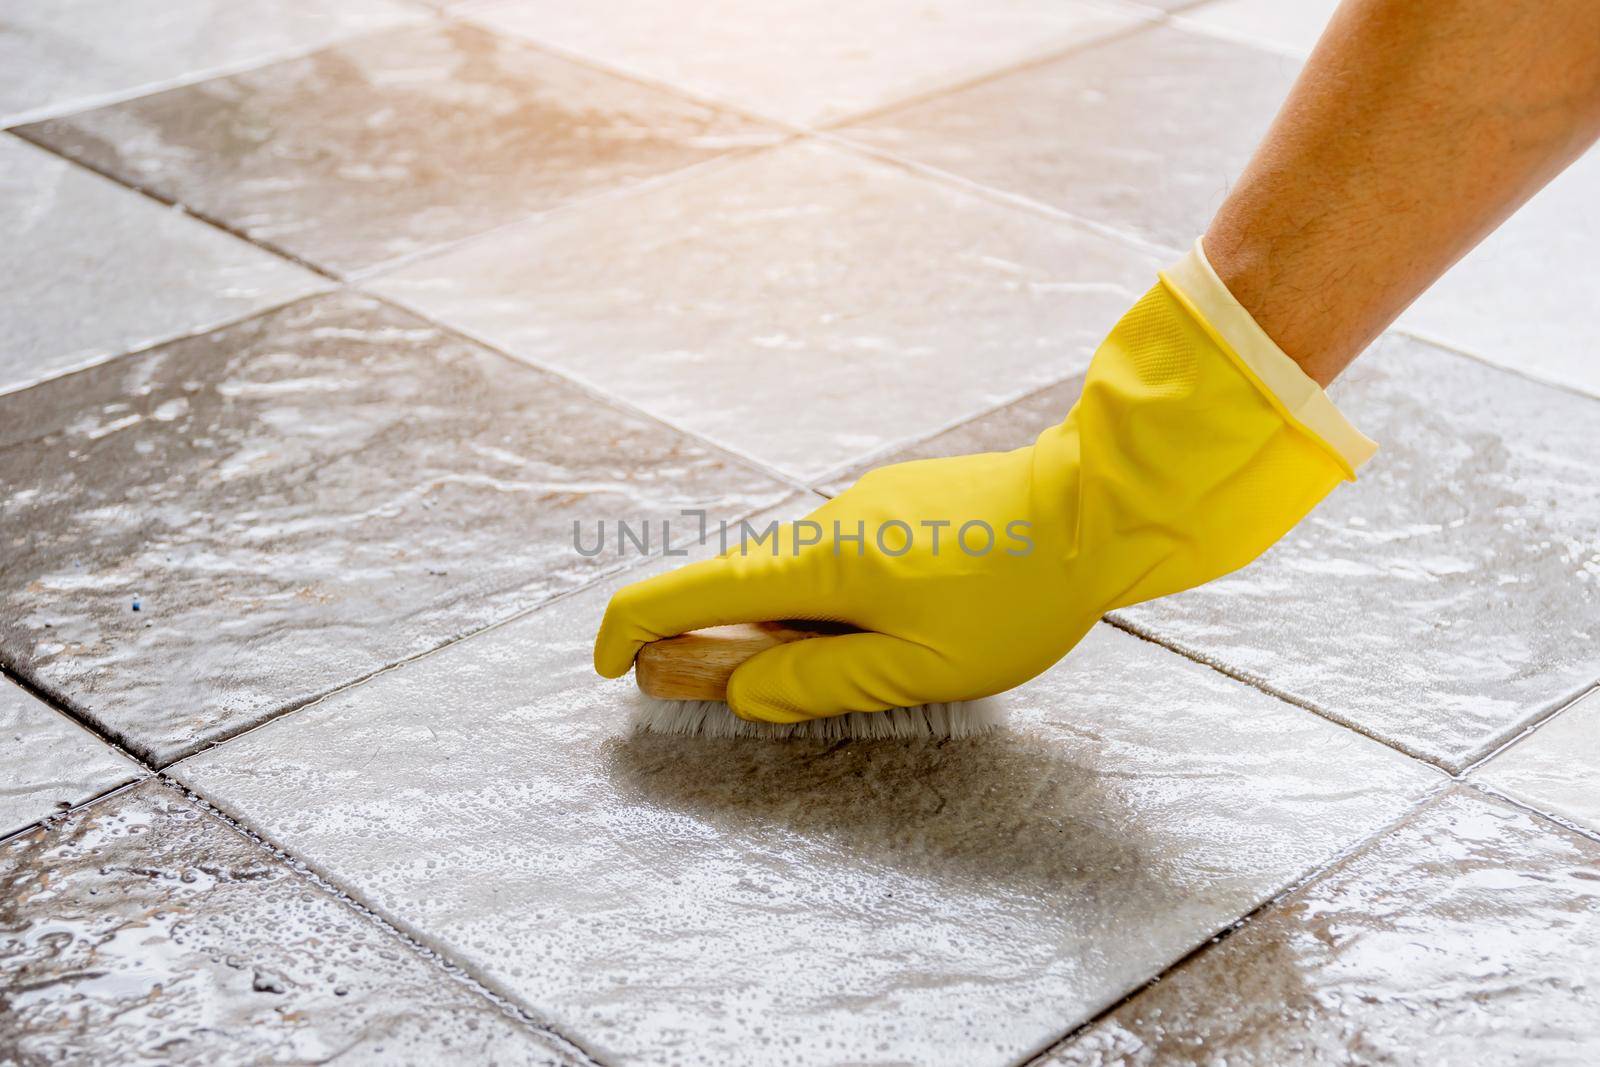 Hands wearing yellow rubber gloves are using a wooden floor scrubber to scrub the tile floor with a floor cleaner. by wattanaphob